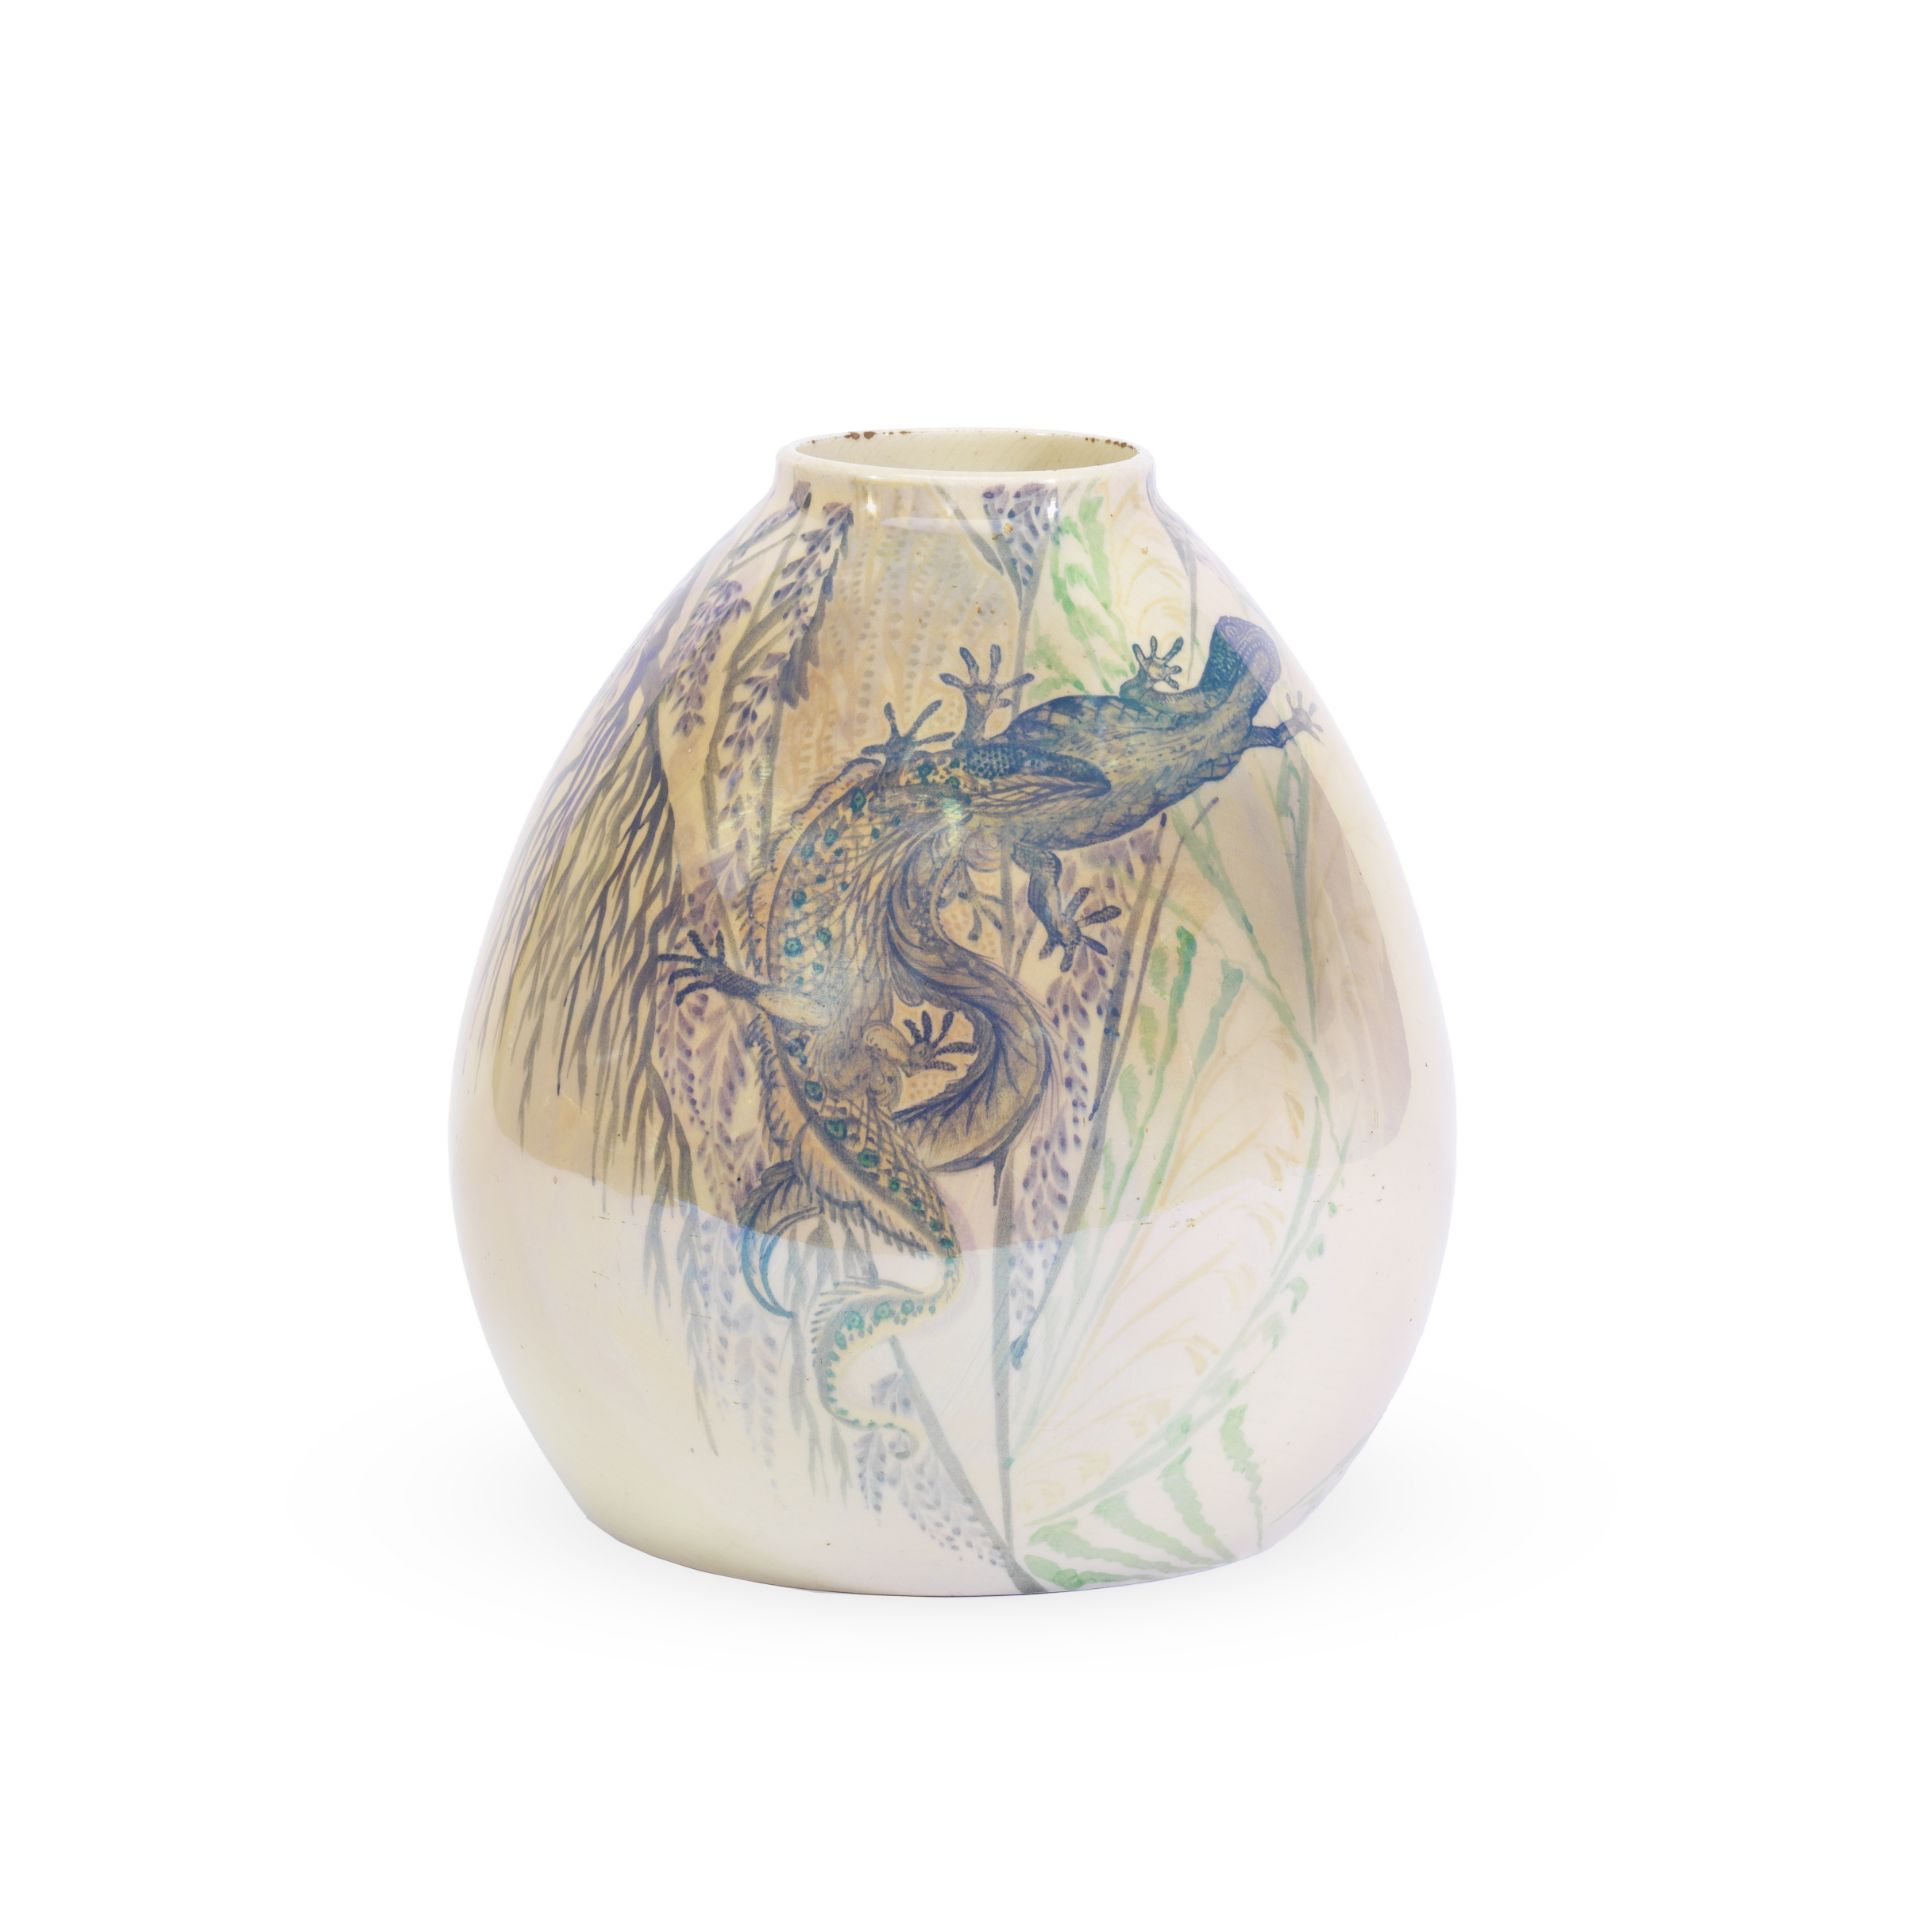 St Lukas Vase with lizard, early 20th Century